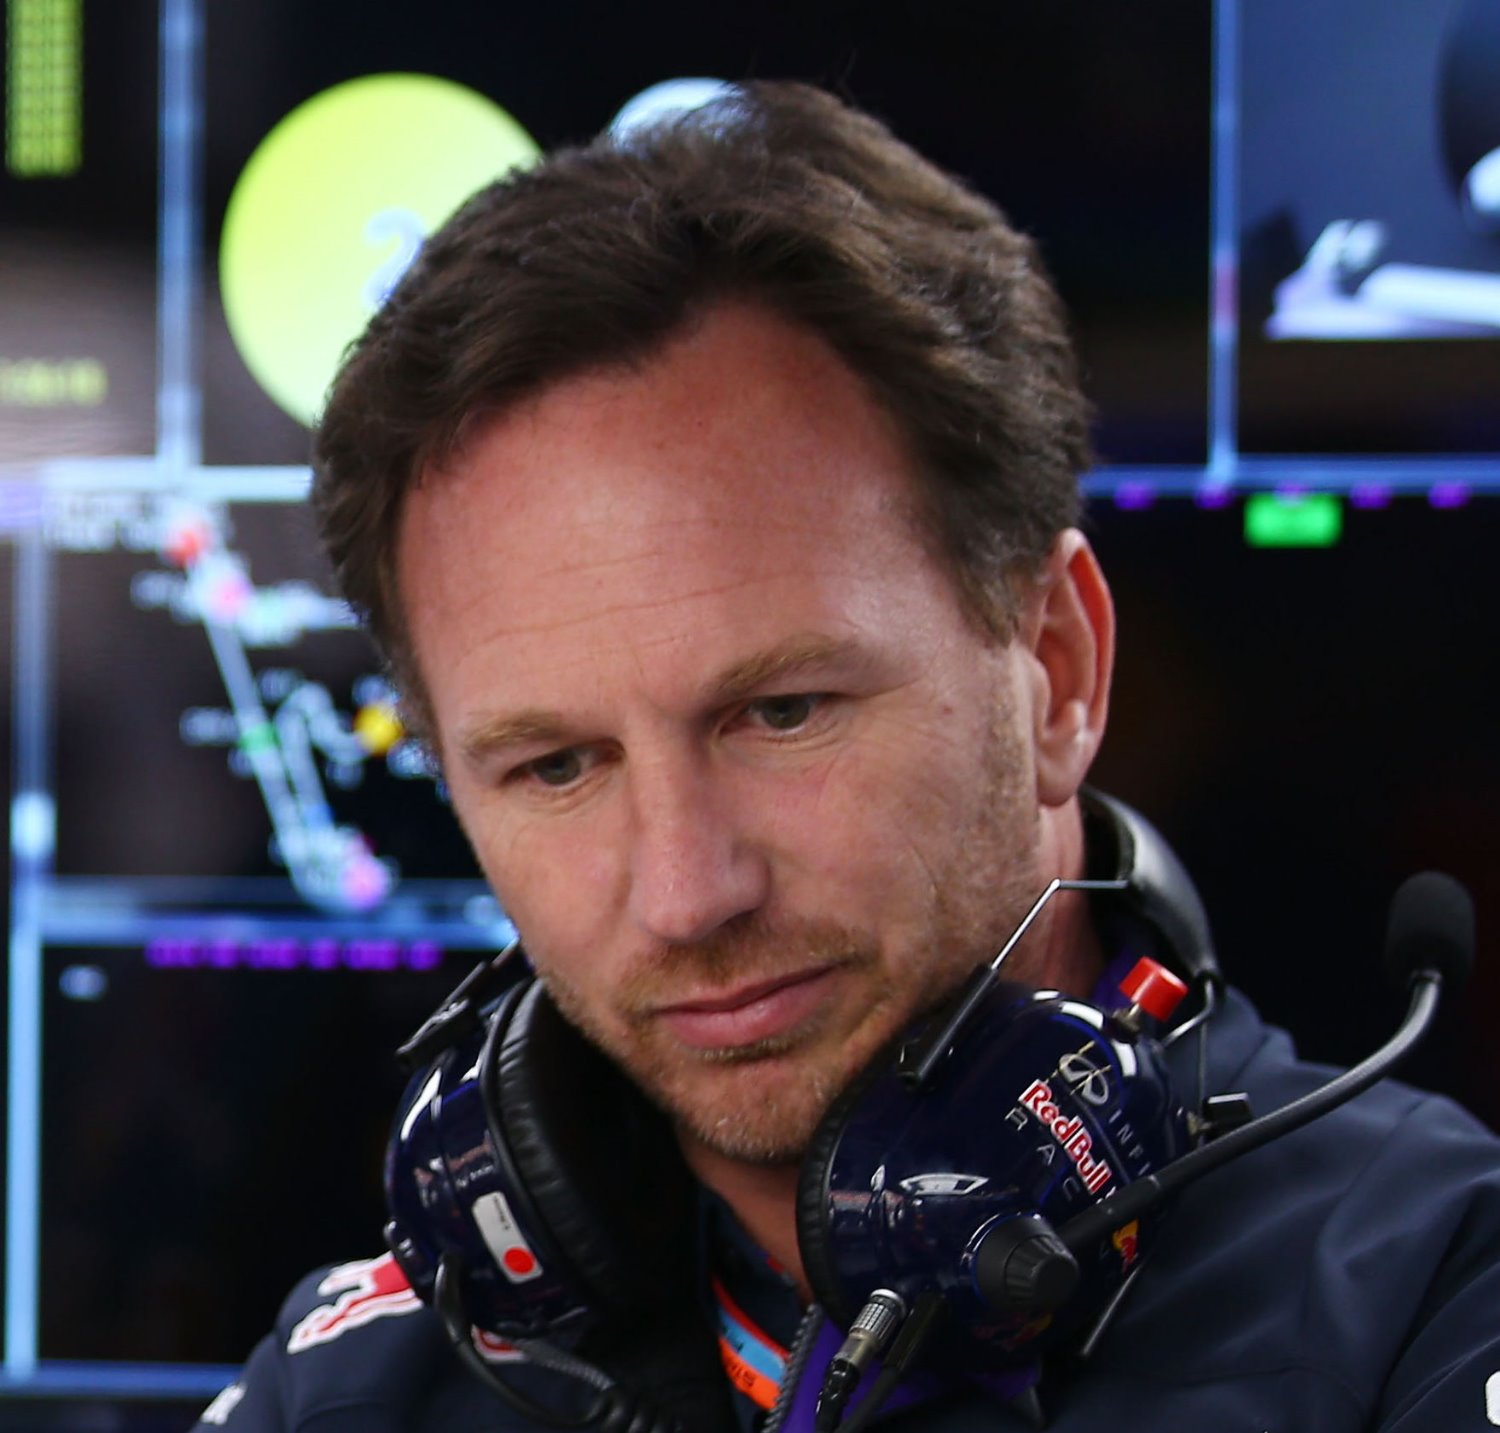 Christian Horner knows early 2016 will be hard